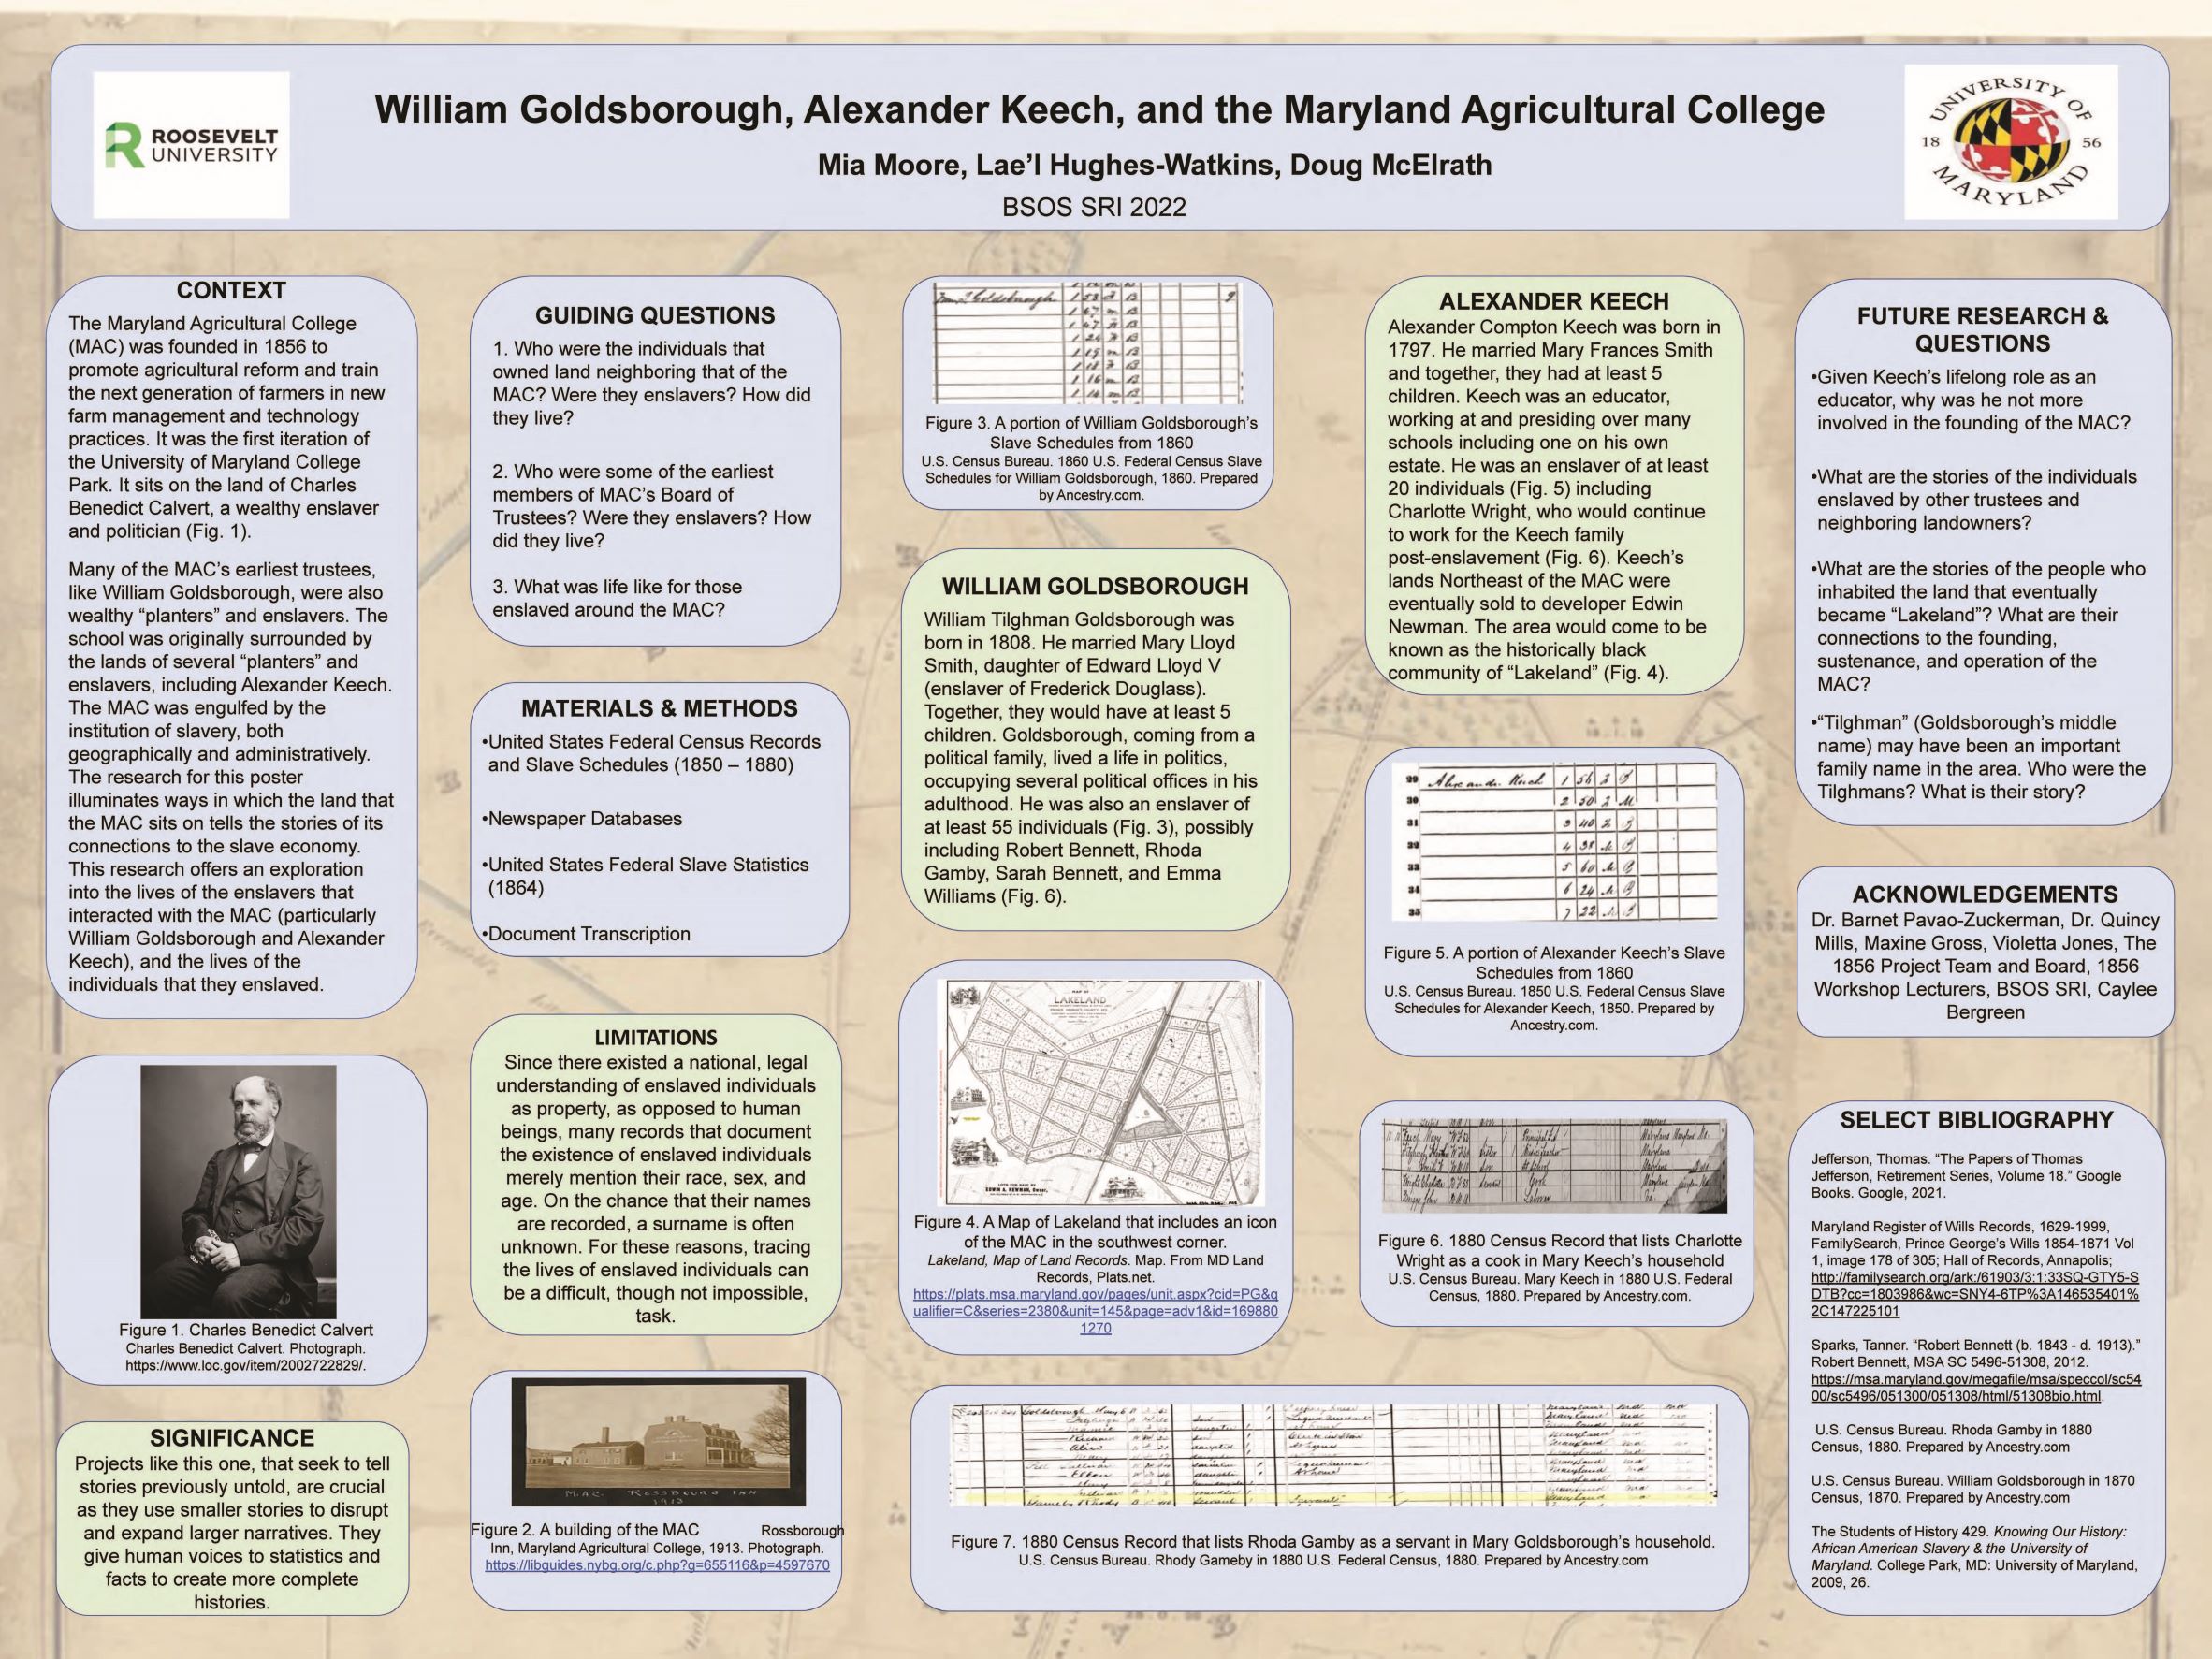 poster featuring information on William Goldsborough, Alexander Keech, and the MAC